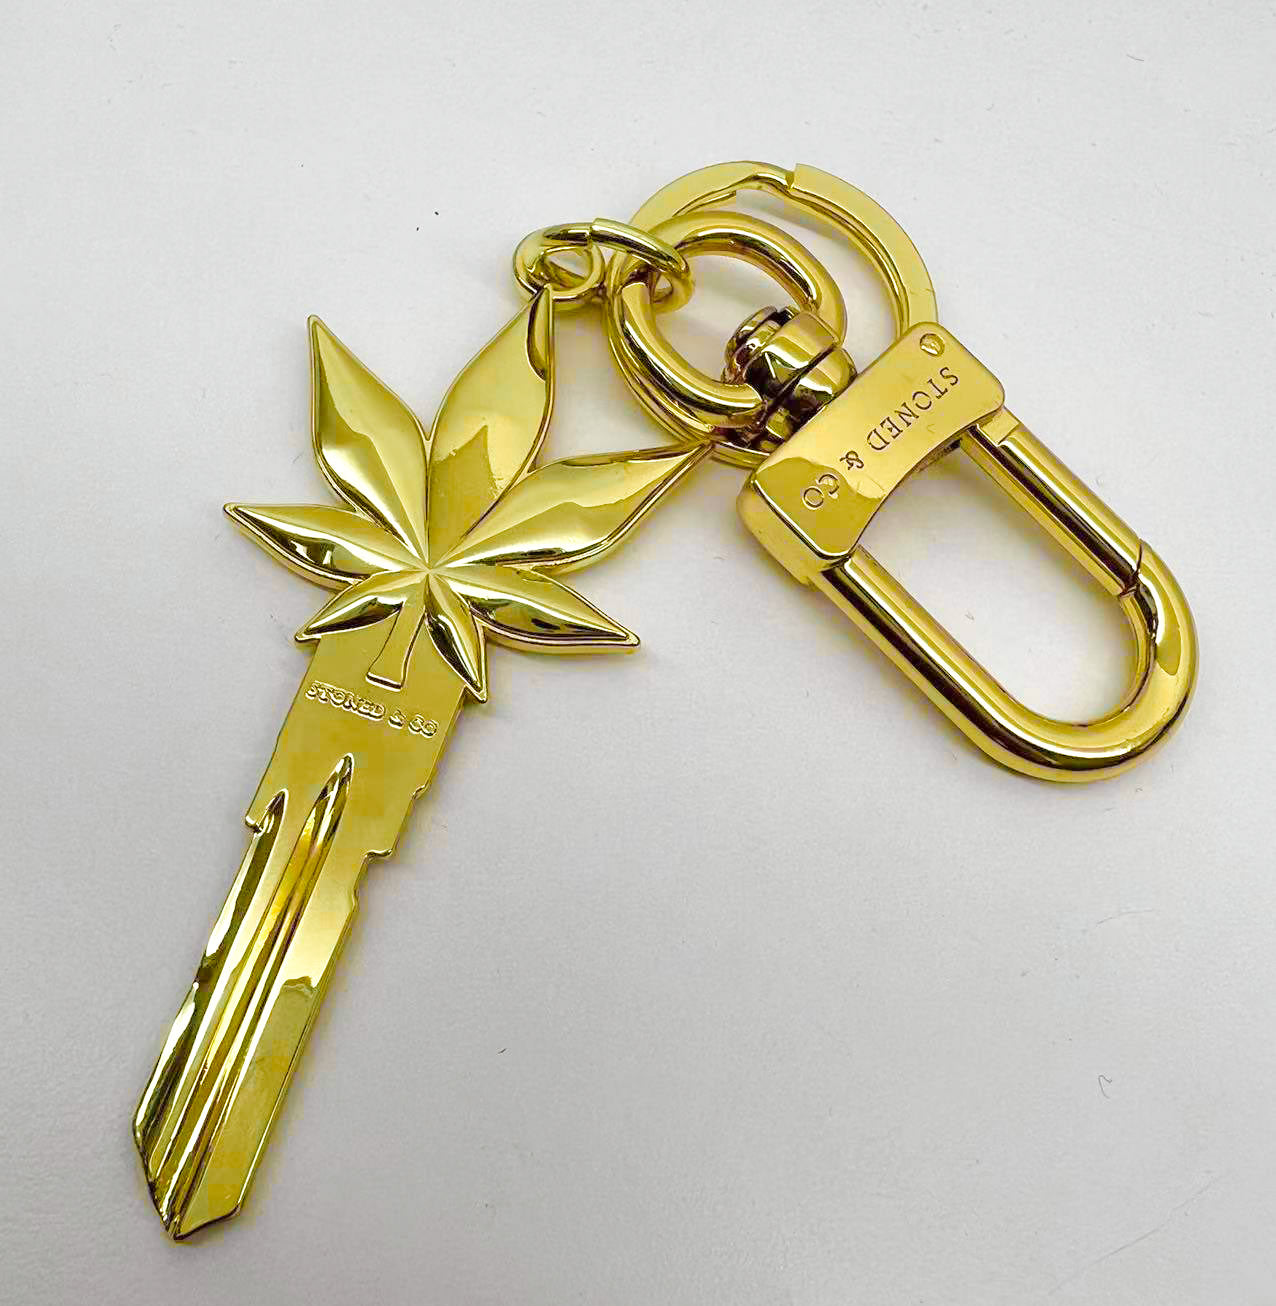 LIMITED EDITION STONED 24K GOLD PLATED KEYCHAIN